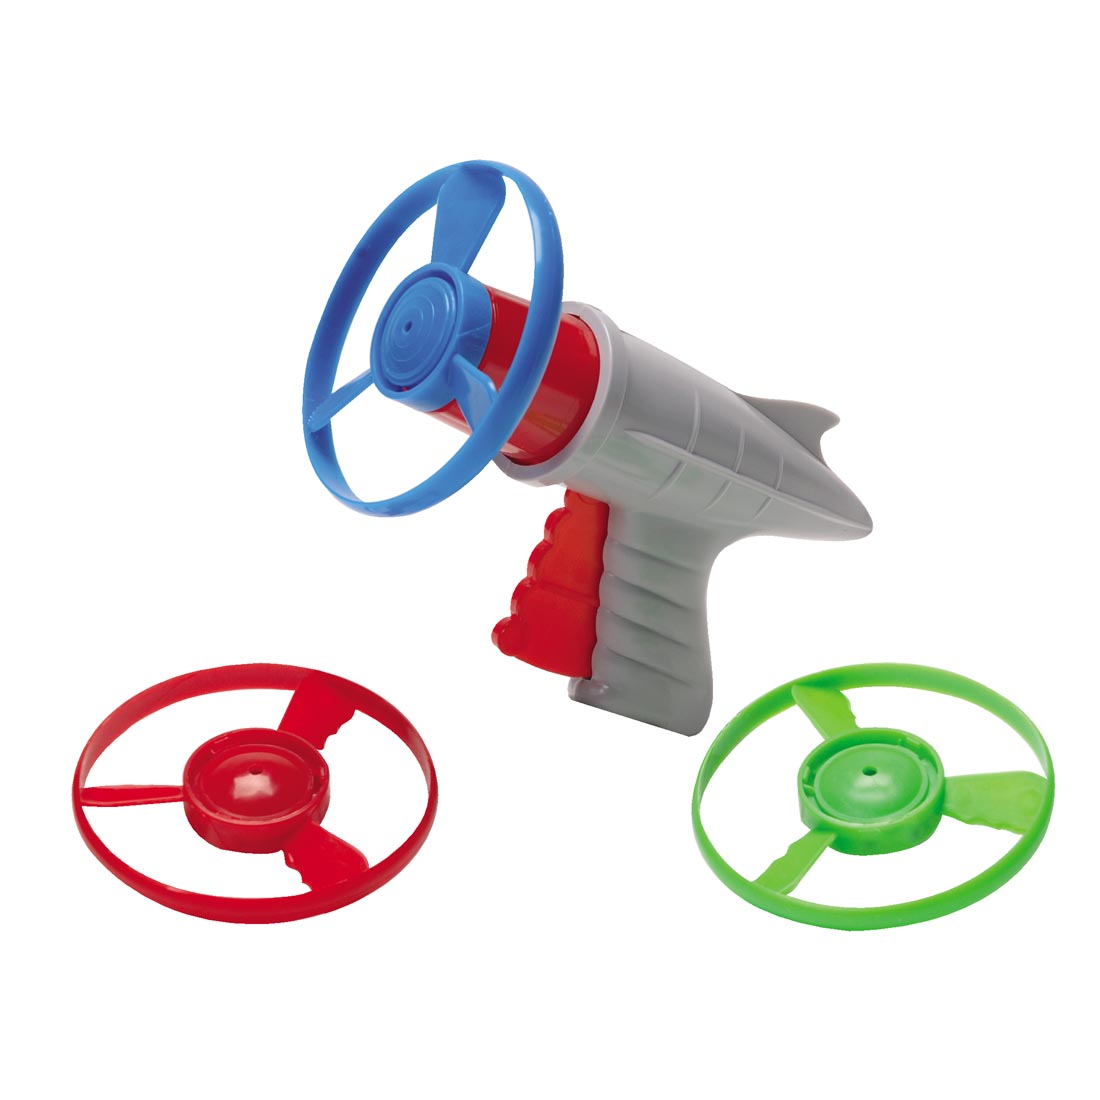 Lunar Launcher Toy with 3 Discs